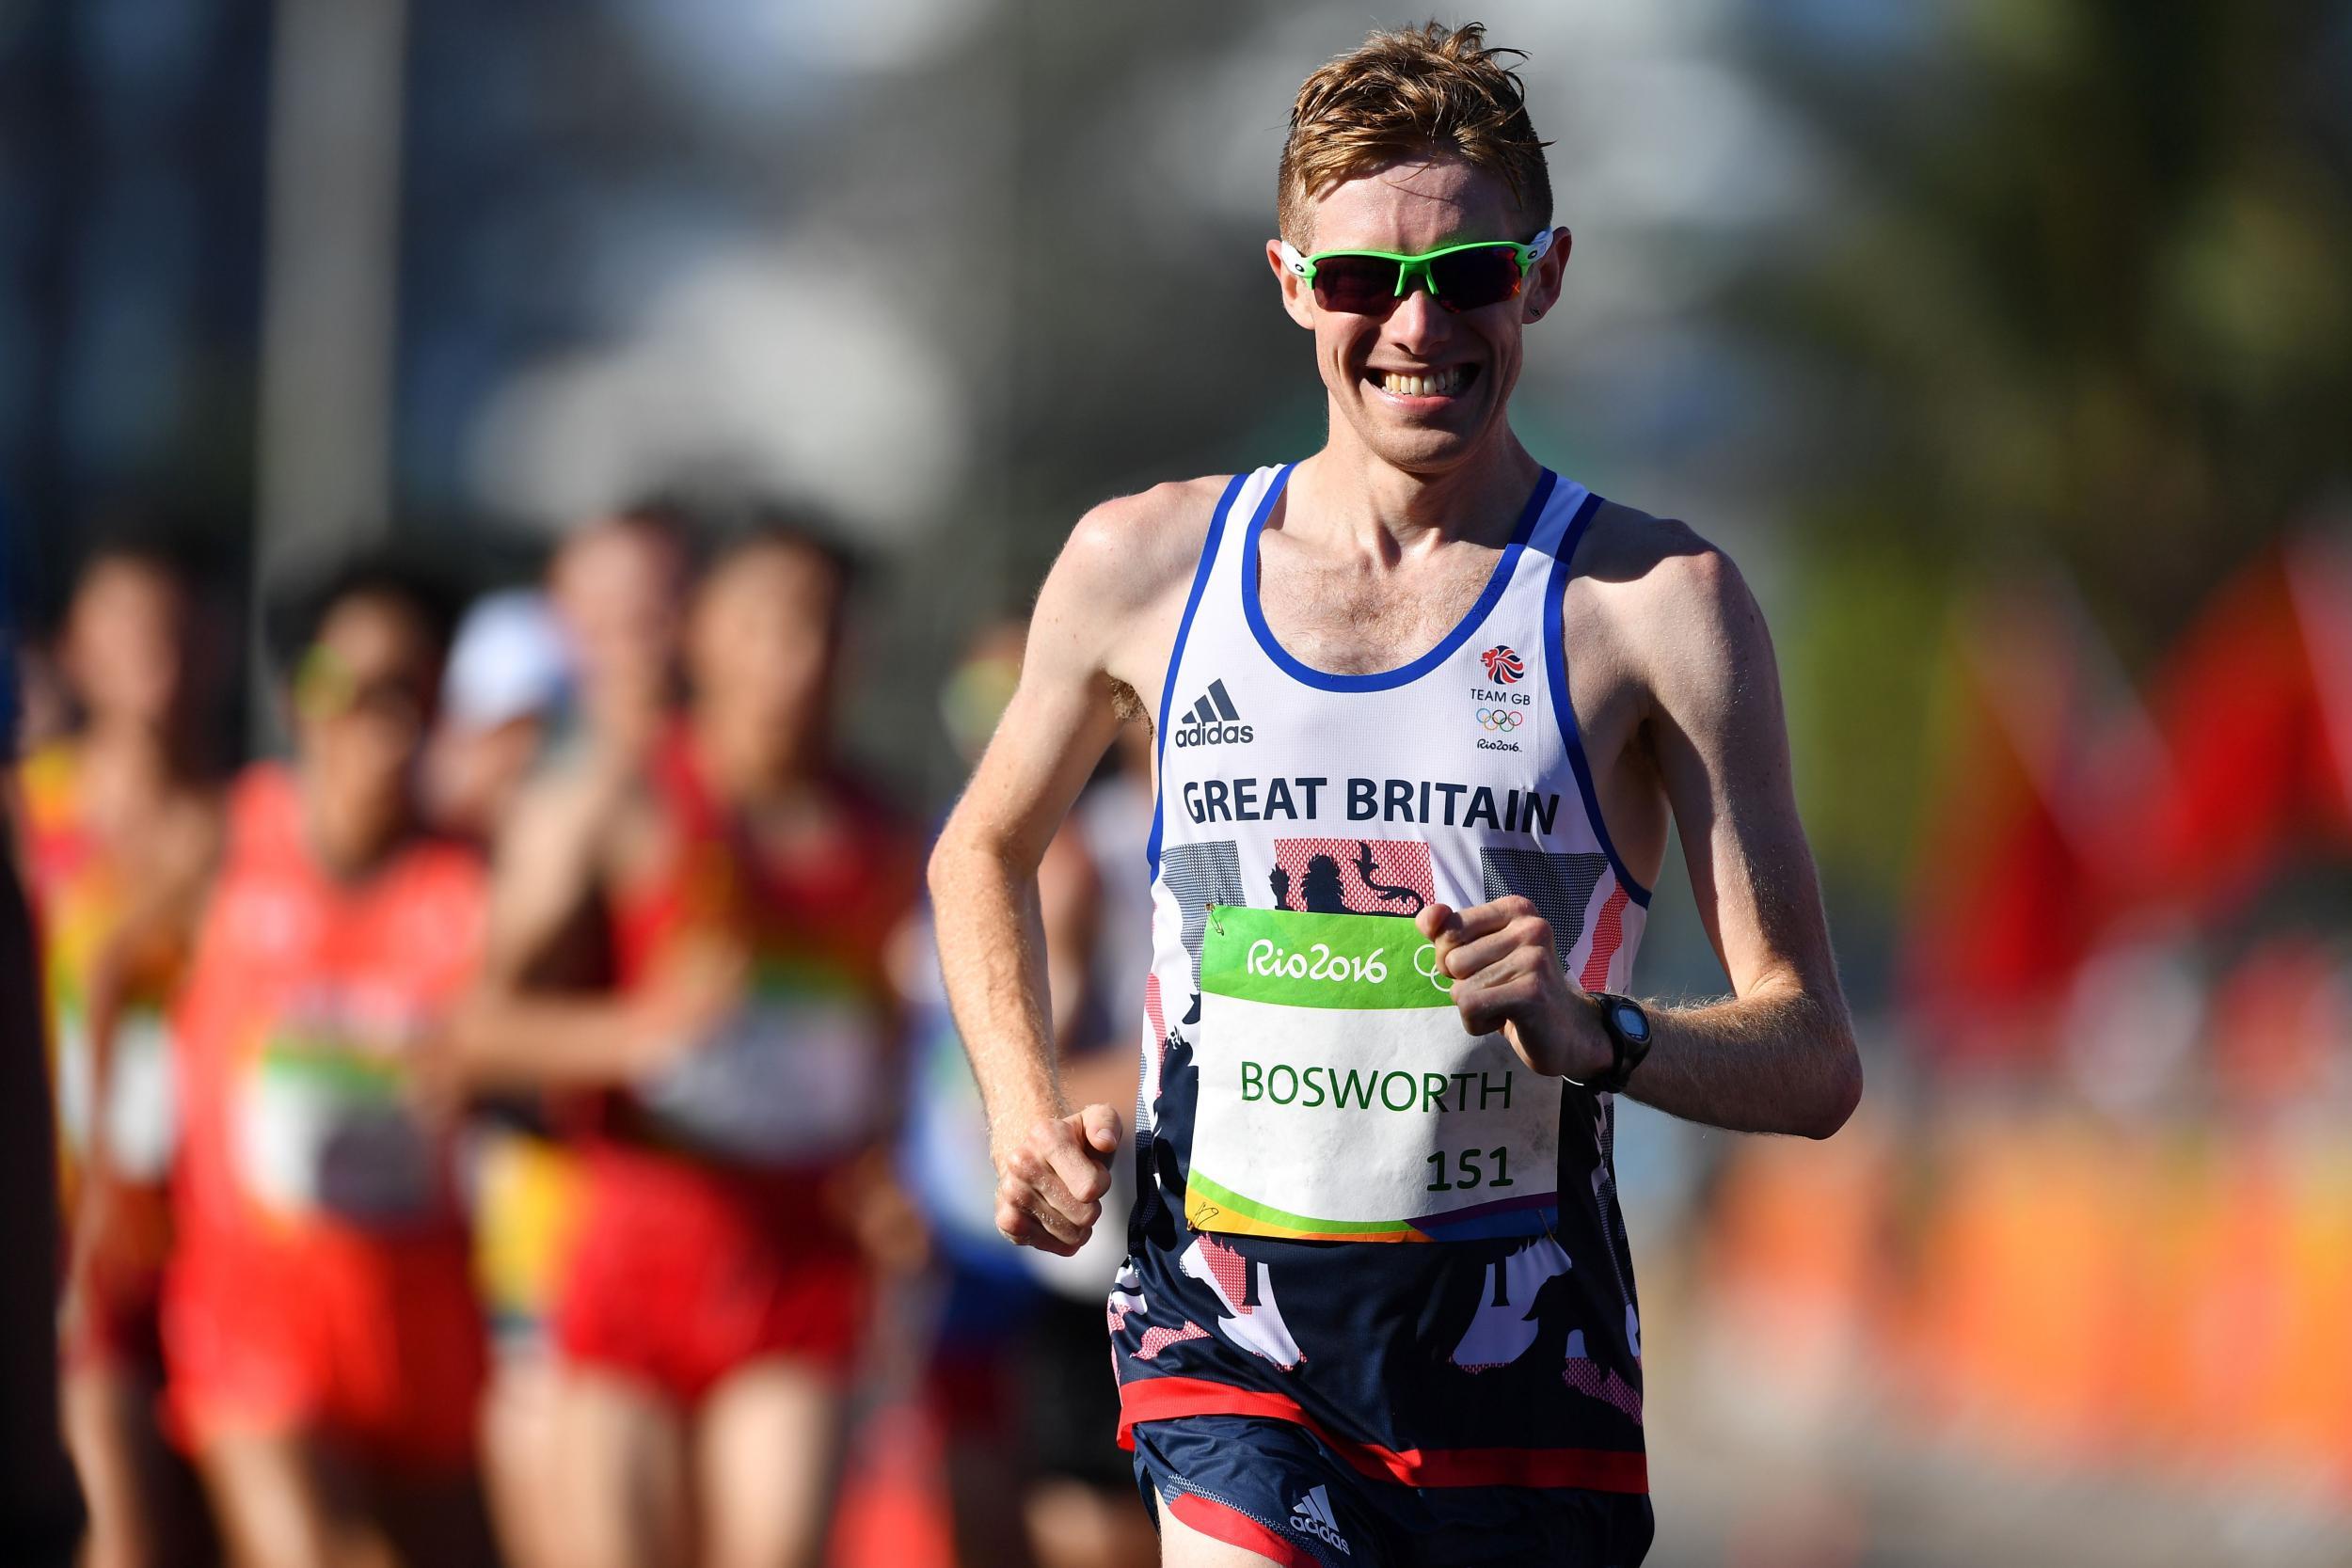 Bosworth is the first British track athlete to come out as gay